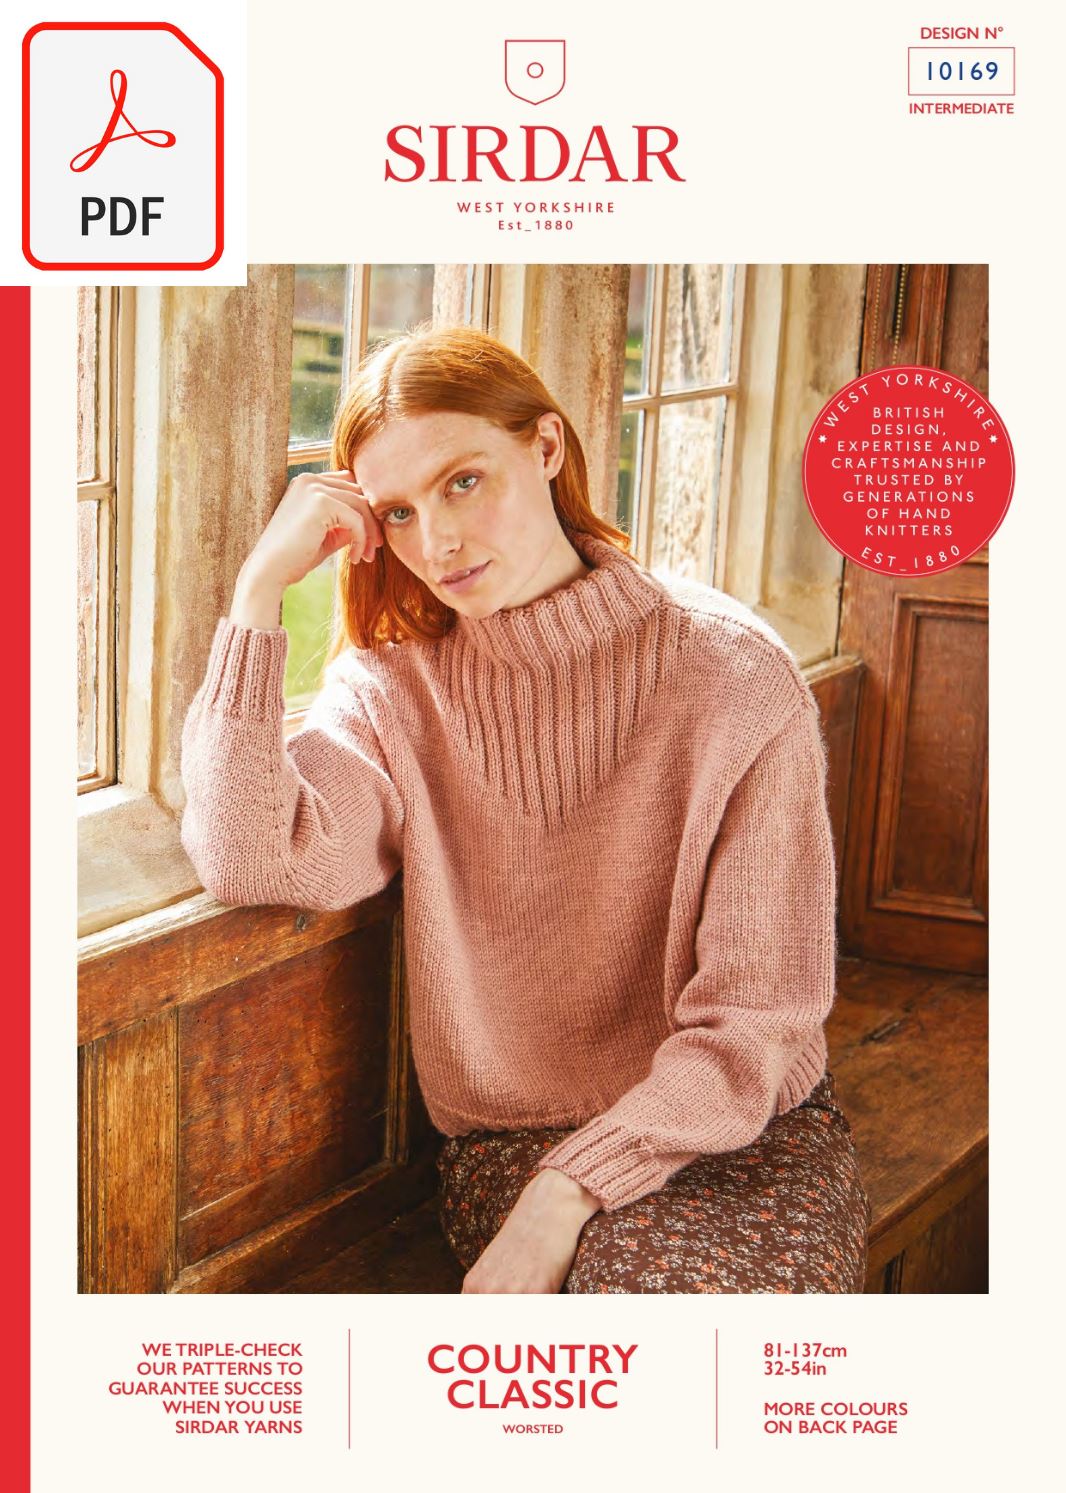 Sirdar 10169 Country Classic Worsted (PDF) - Knit in a Box